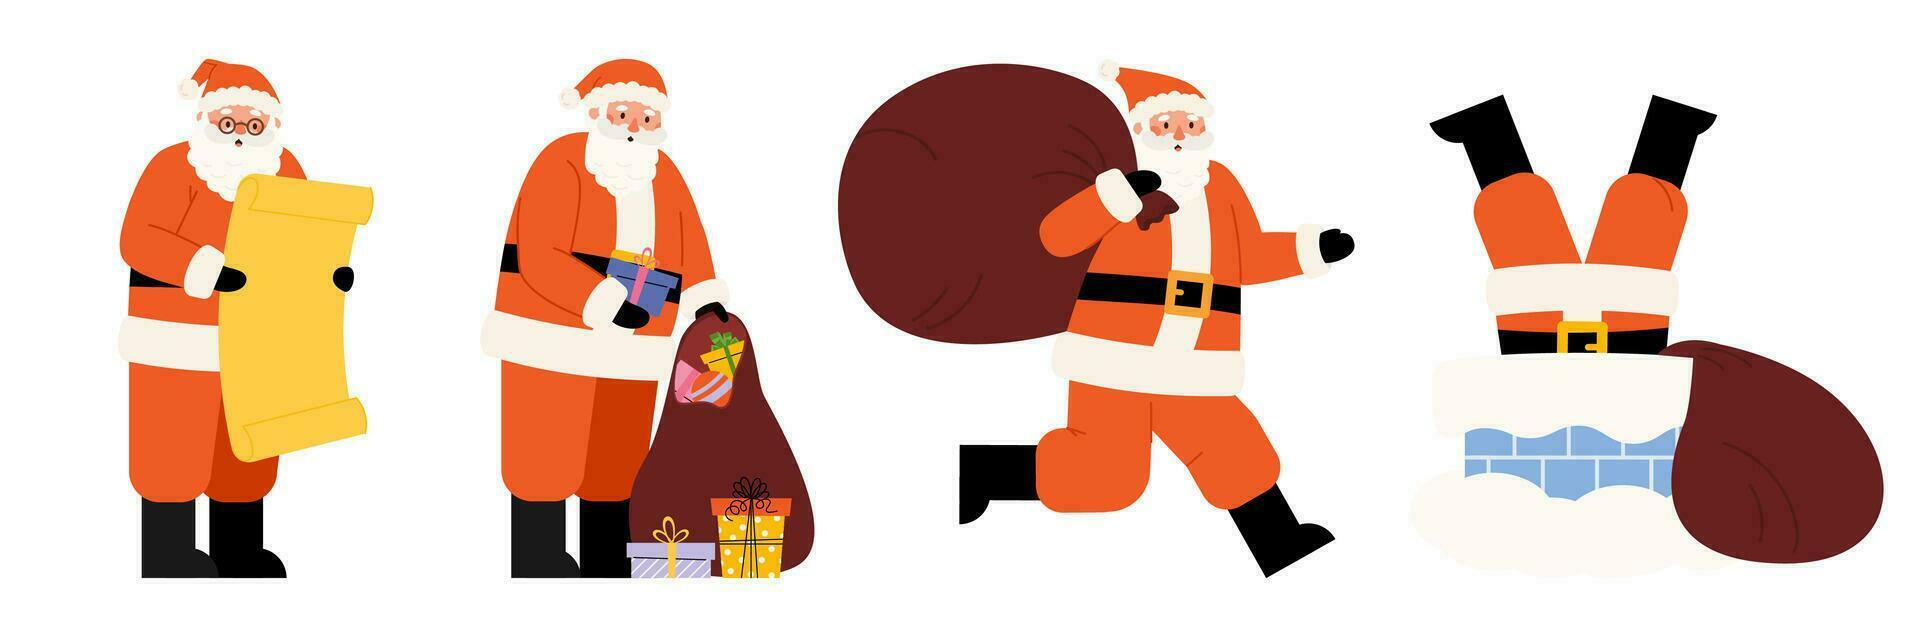 Set of Santa Clauses in different poses vector